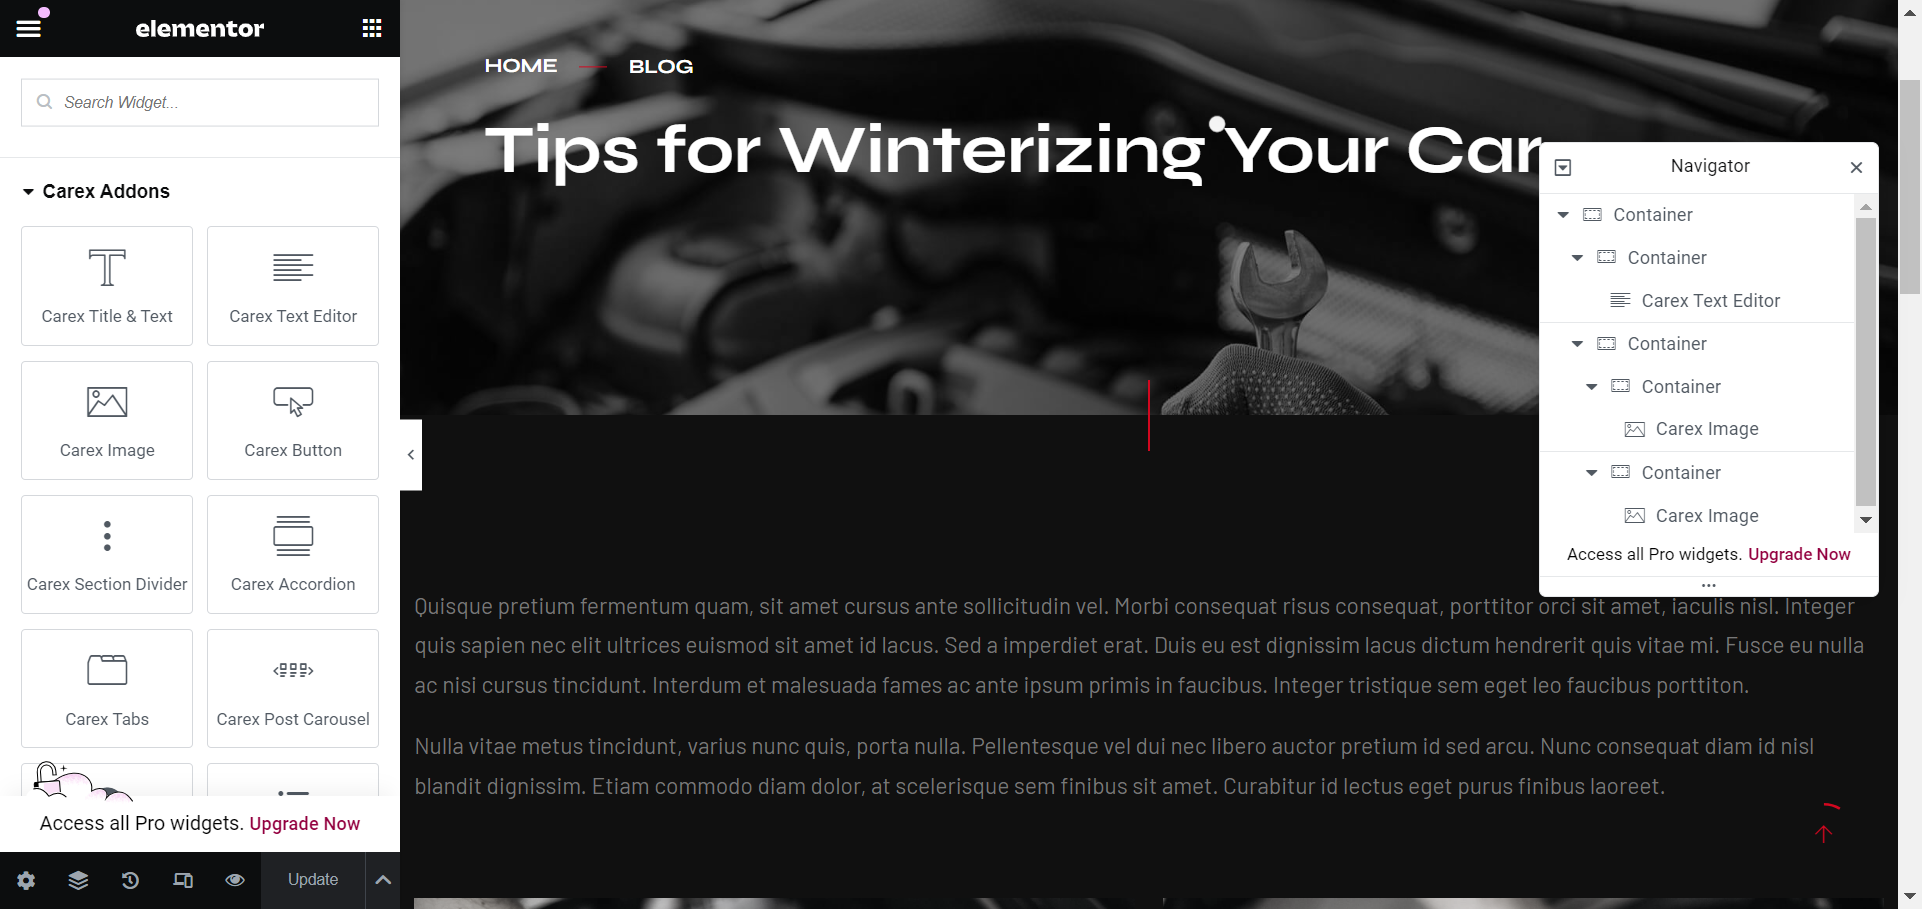 Edit-Tips-for-Winterizing-Your-Car-with-Elementor